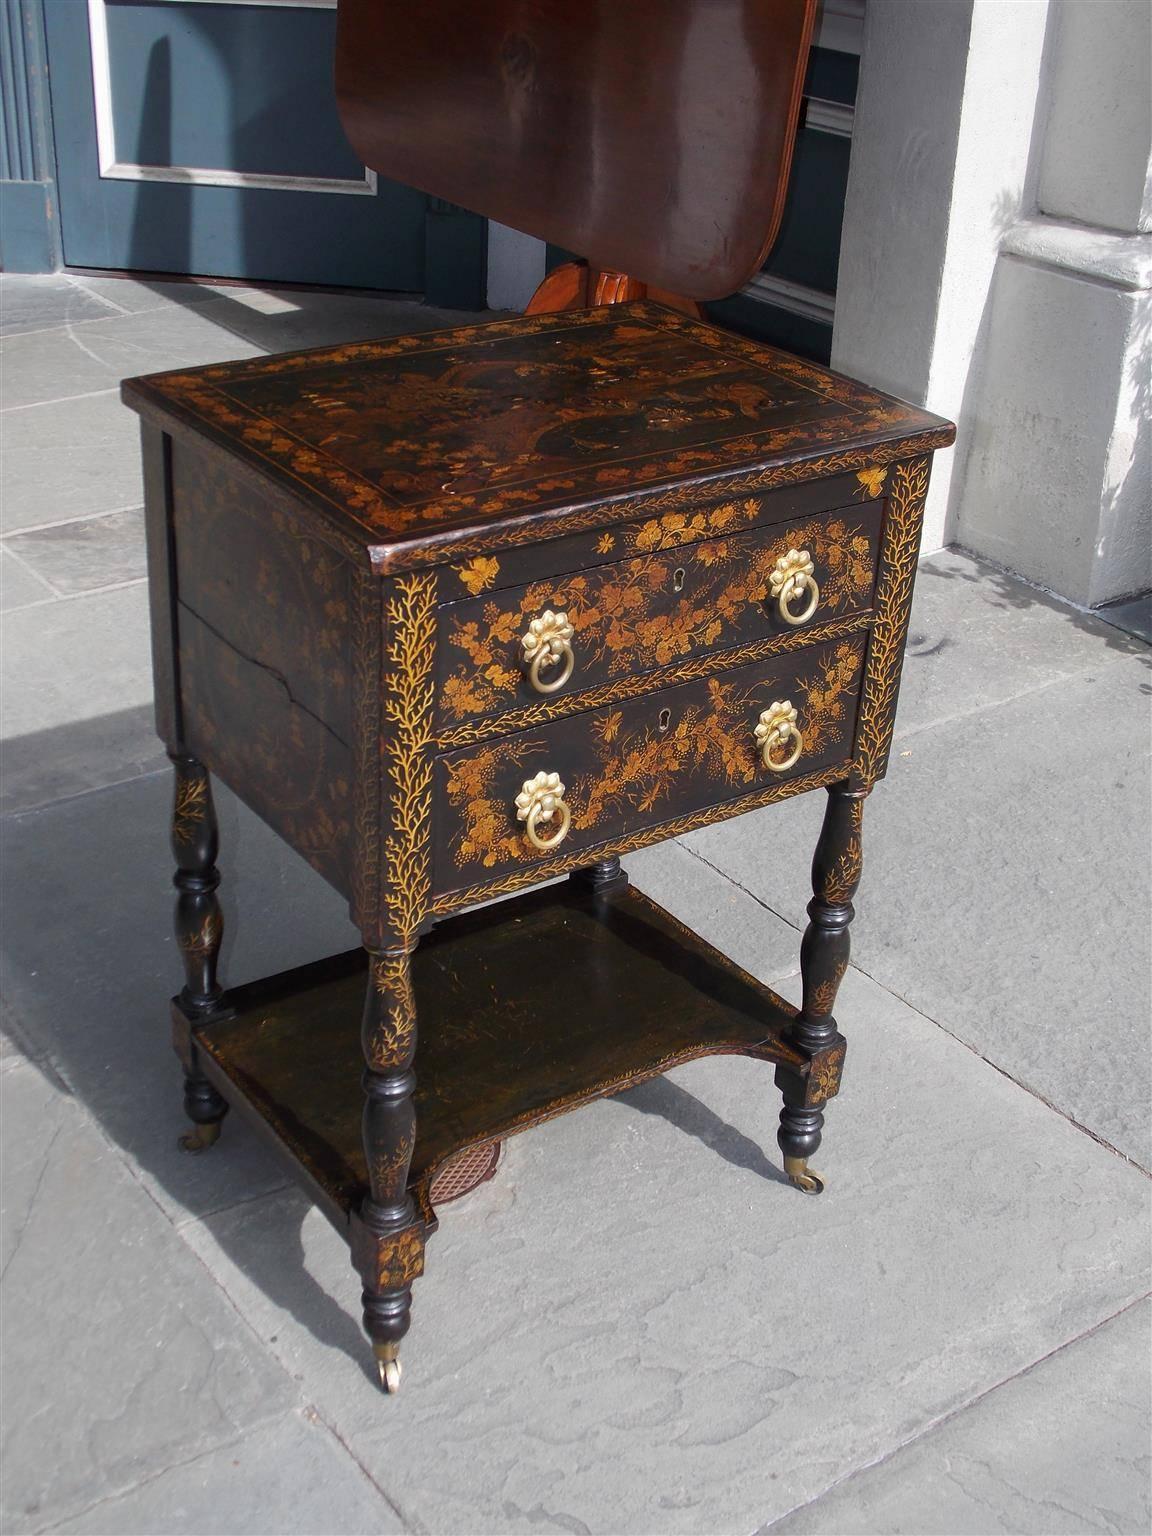 Fine American black lacquered & Japanned two drawer stand with original gilt floral brasses, lower shelf, and terminating on turned bulbous legs with the original brass casters. New York, Early 19th Century. Secondary wood consist of white pine and